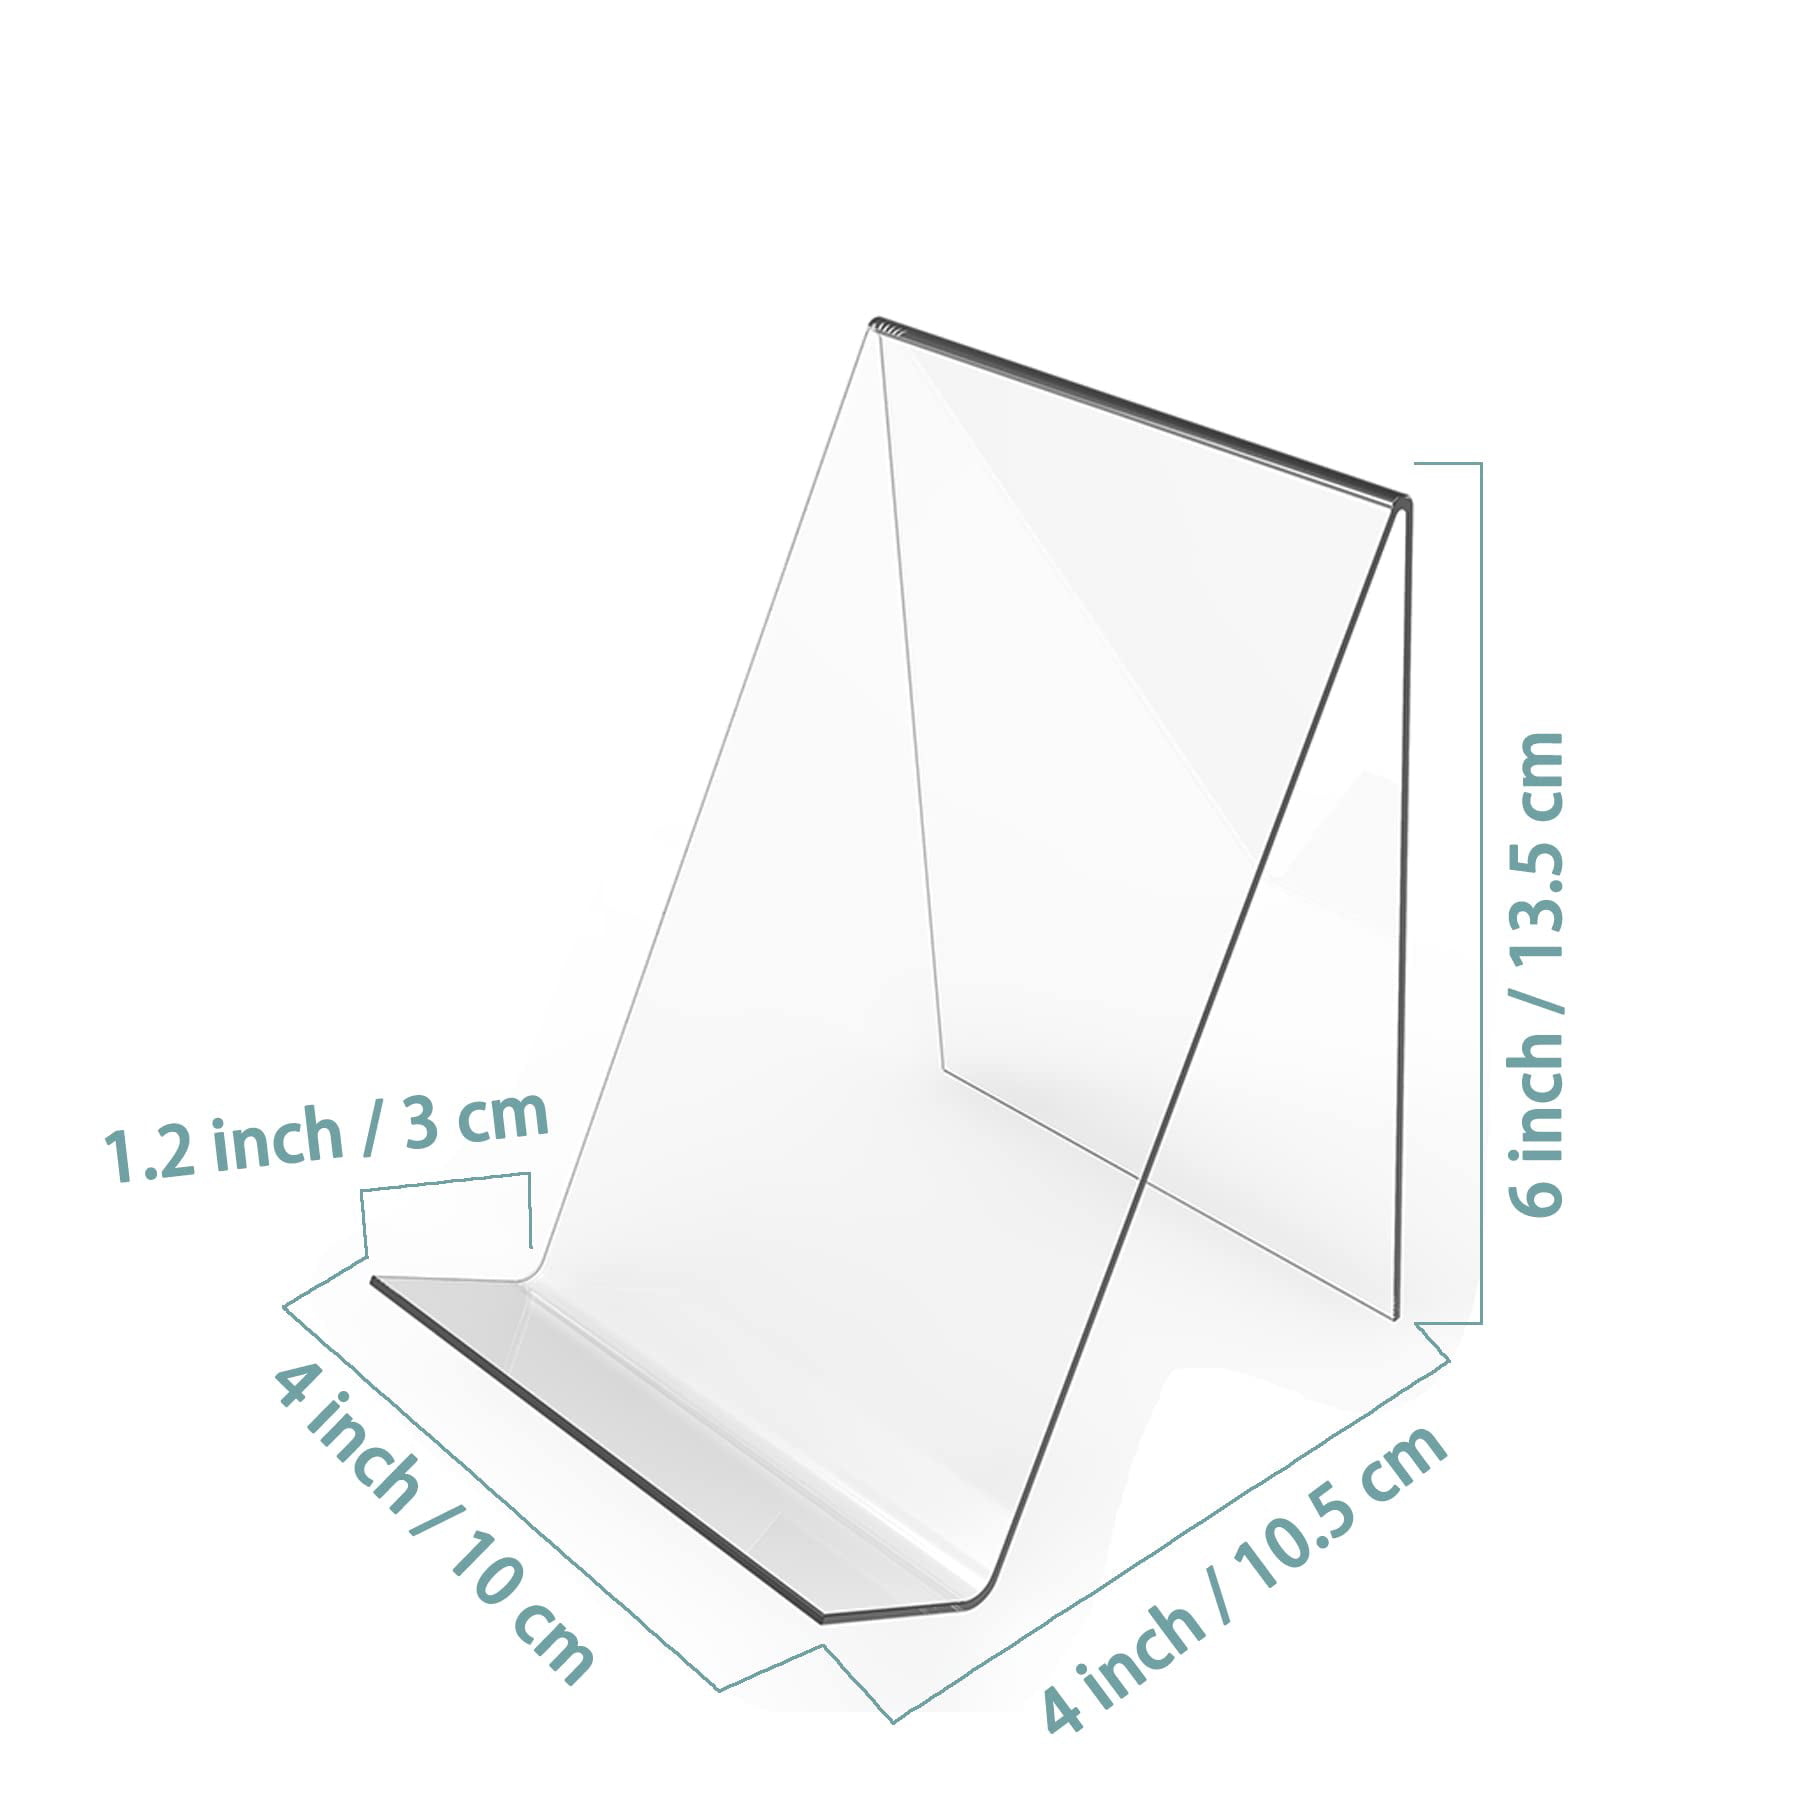  Boloyo Acrylic Book Stand Without Ledge ,6 Inch 6PC Clear  Acrylic Display Easel Transparent Display Stand Holder Tablet Holder for  Displaying Pictures,Books,Artworks, CDs : Boloyo: Home & Kitchen